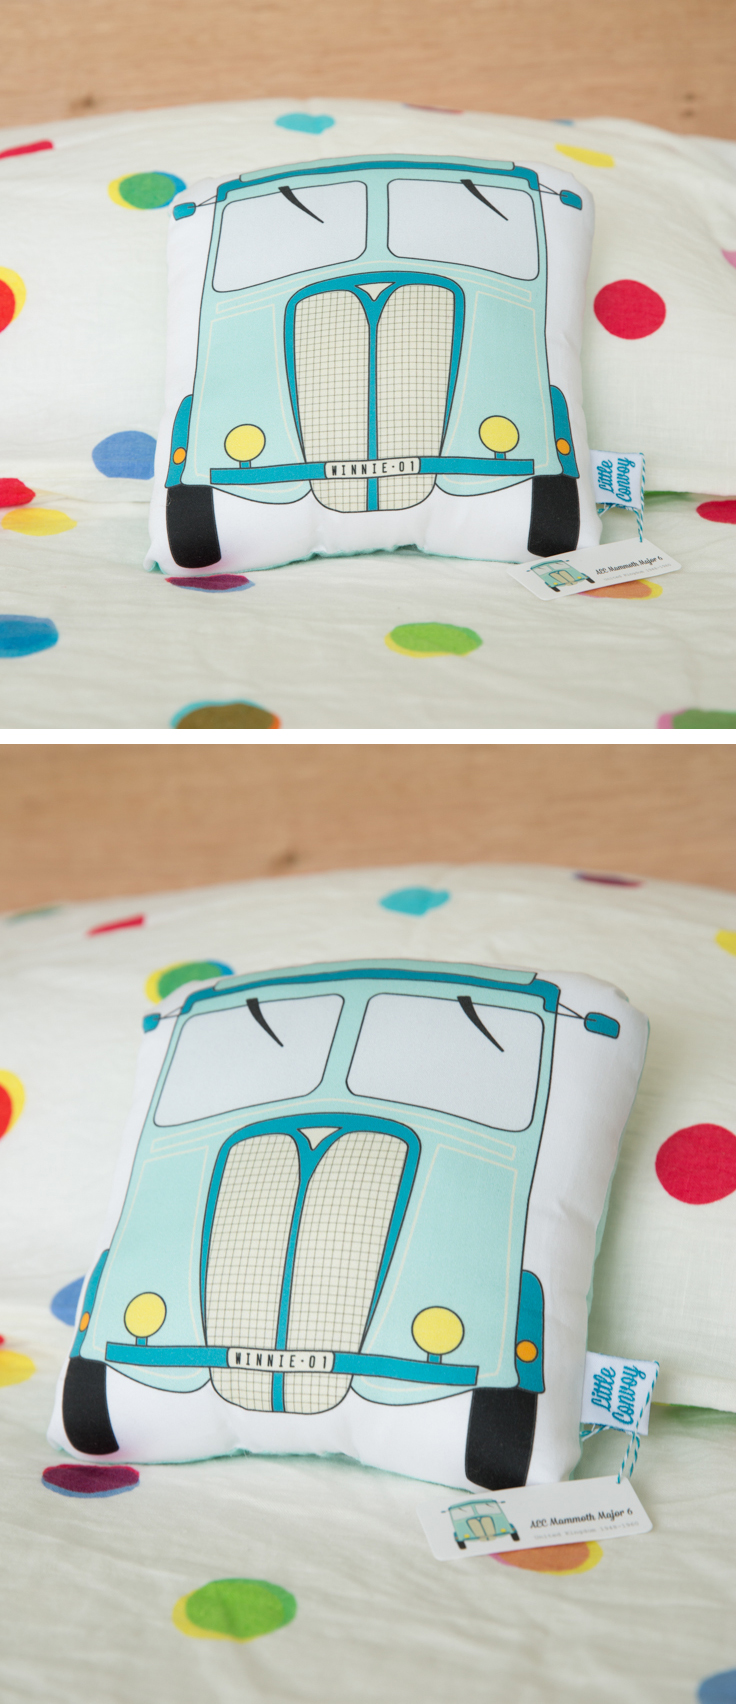 Kitty of Little Convoy makes cuddly truck soft toy pillows from drawings of her favourite vintage trucks. The trucks are first hand drawn, and then digitally drawn and coloured. They are printed on certified organic cotton, with organic cotton backing and filled with stuffing. Each truck is handmade. Great presents for newborn baby, little boy, or little girl!